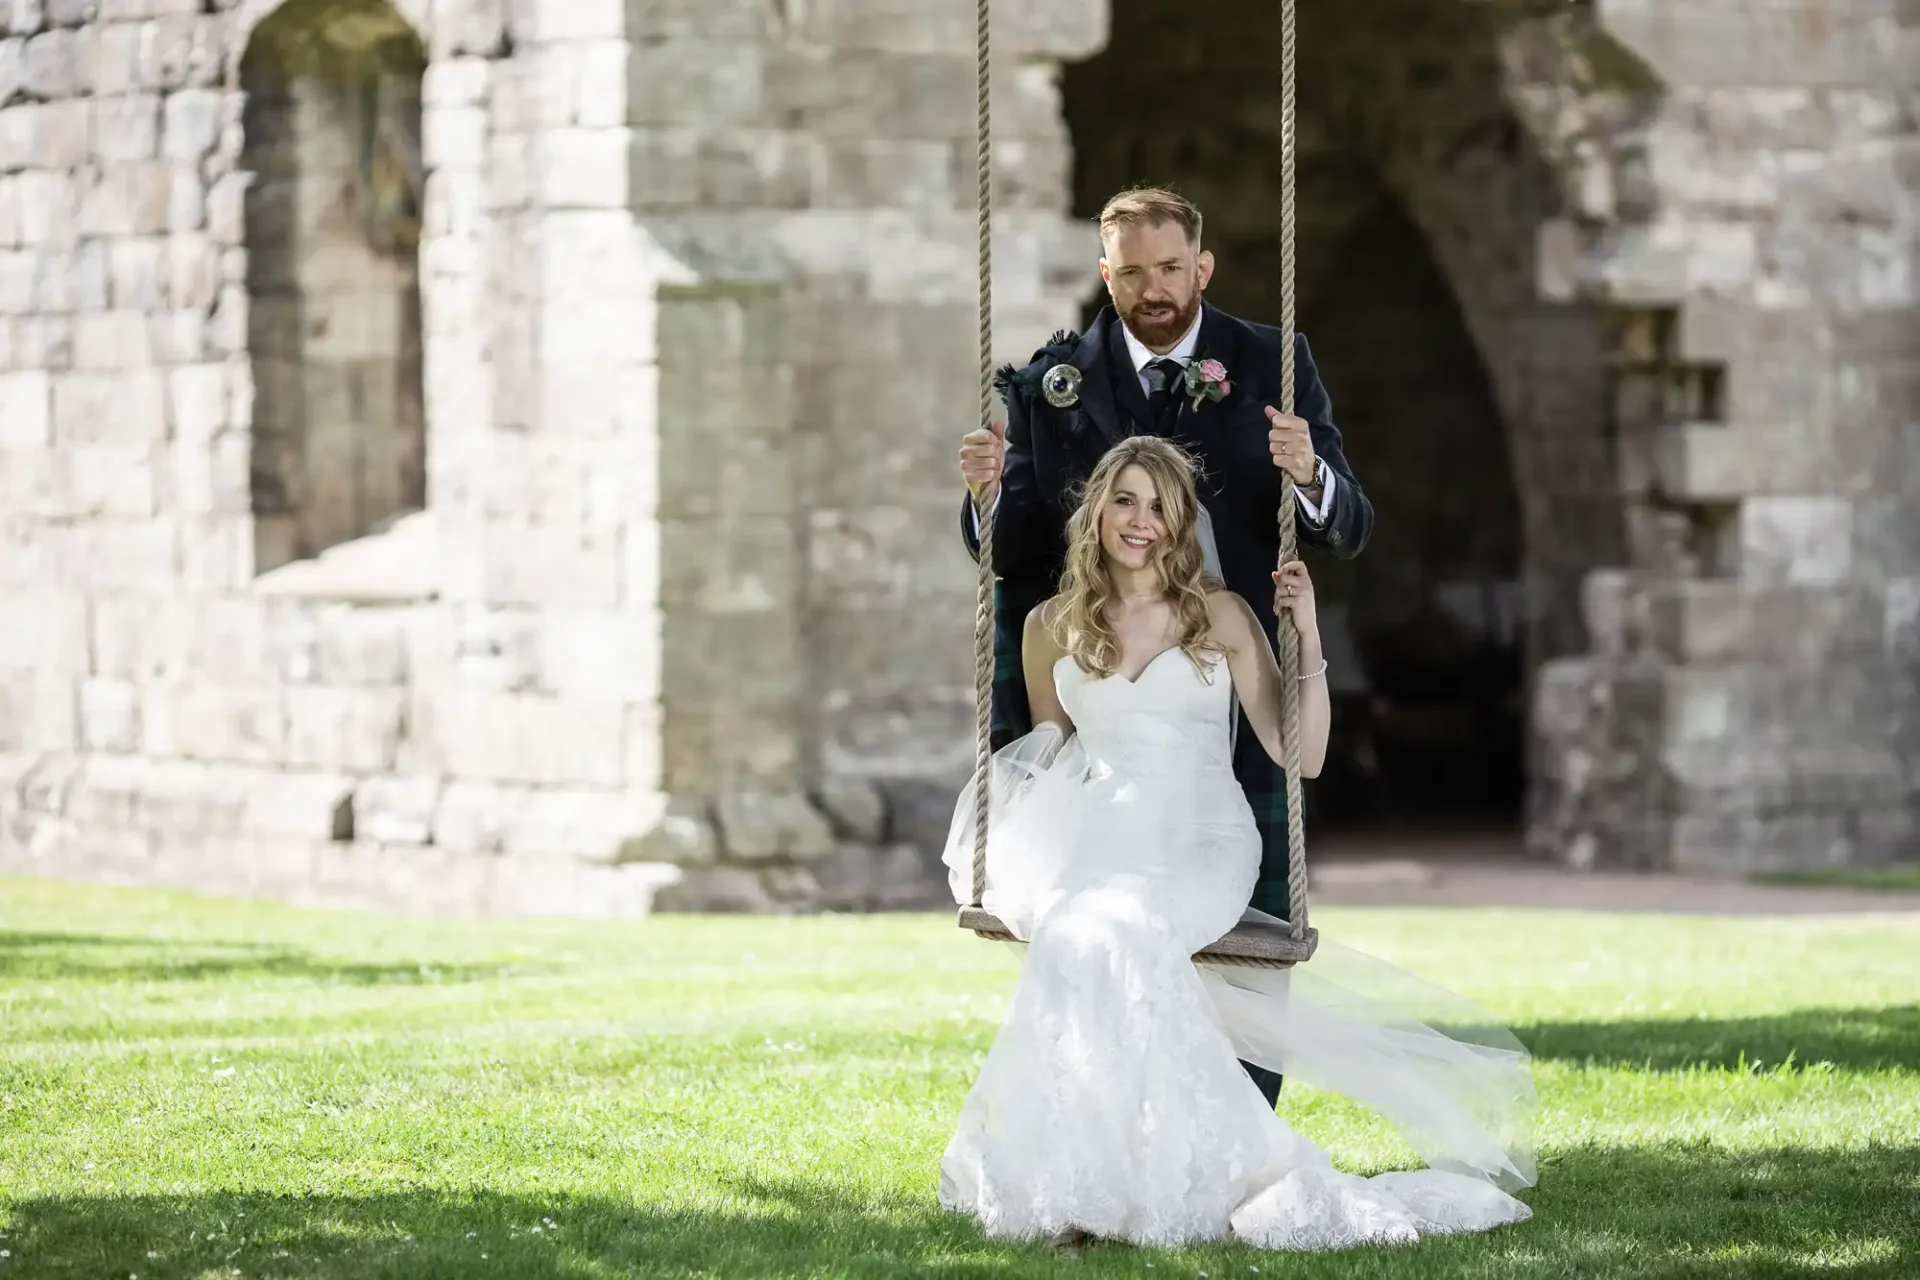 A bride and groom smiling on a swing, set against the backdrop of an old stone archway in a lush green park.